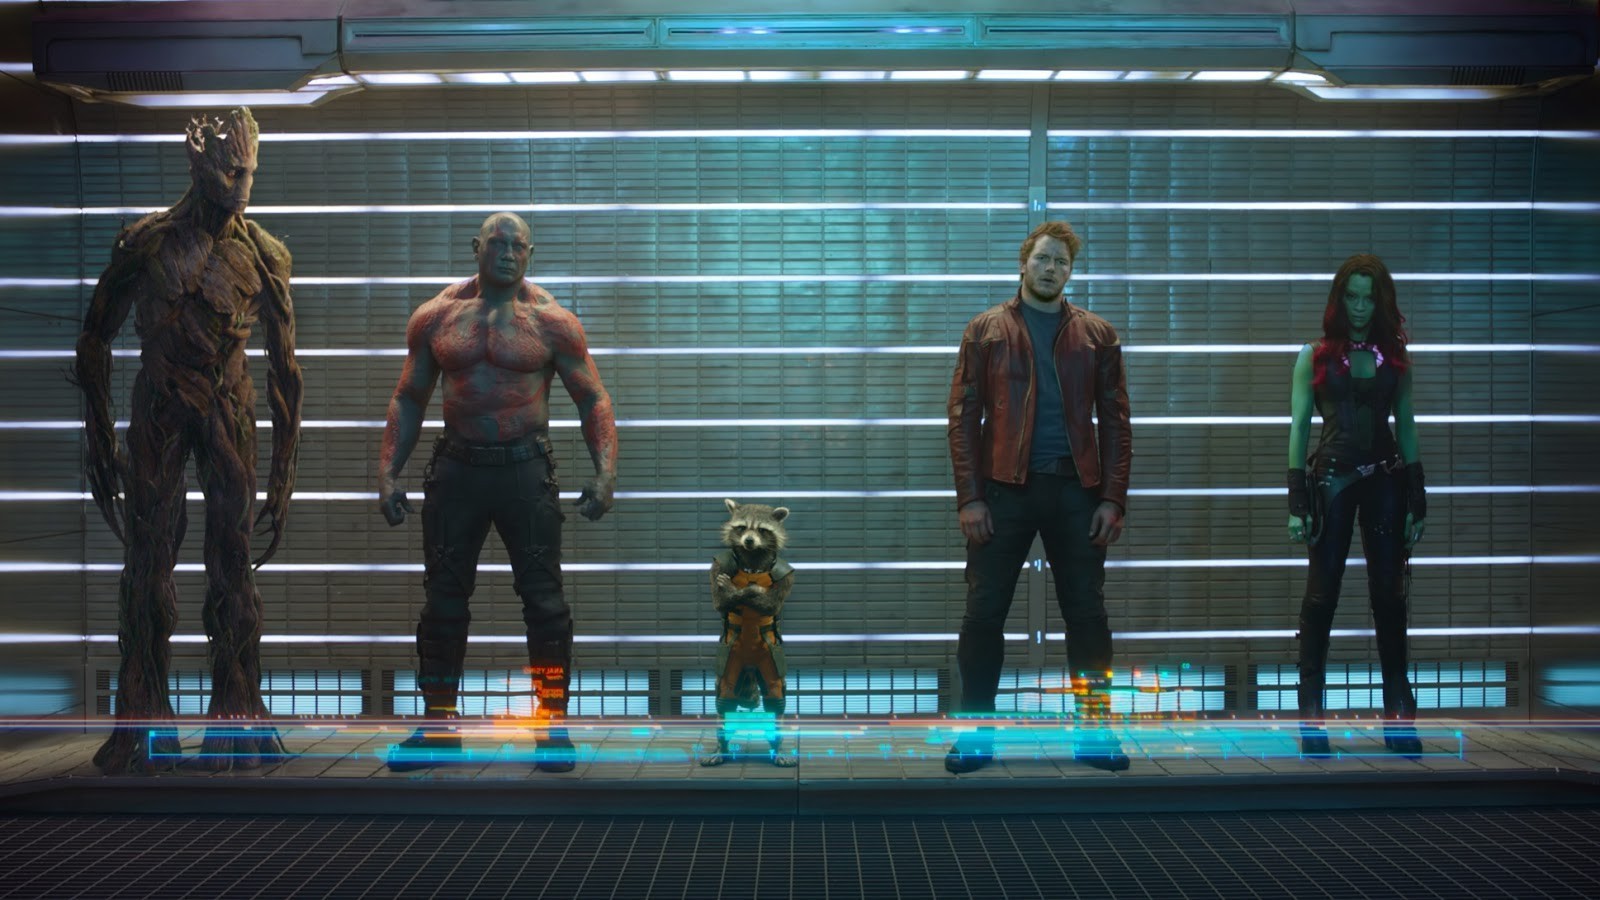 Guardians Of The Galaxy Wallpaper